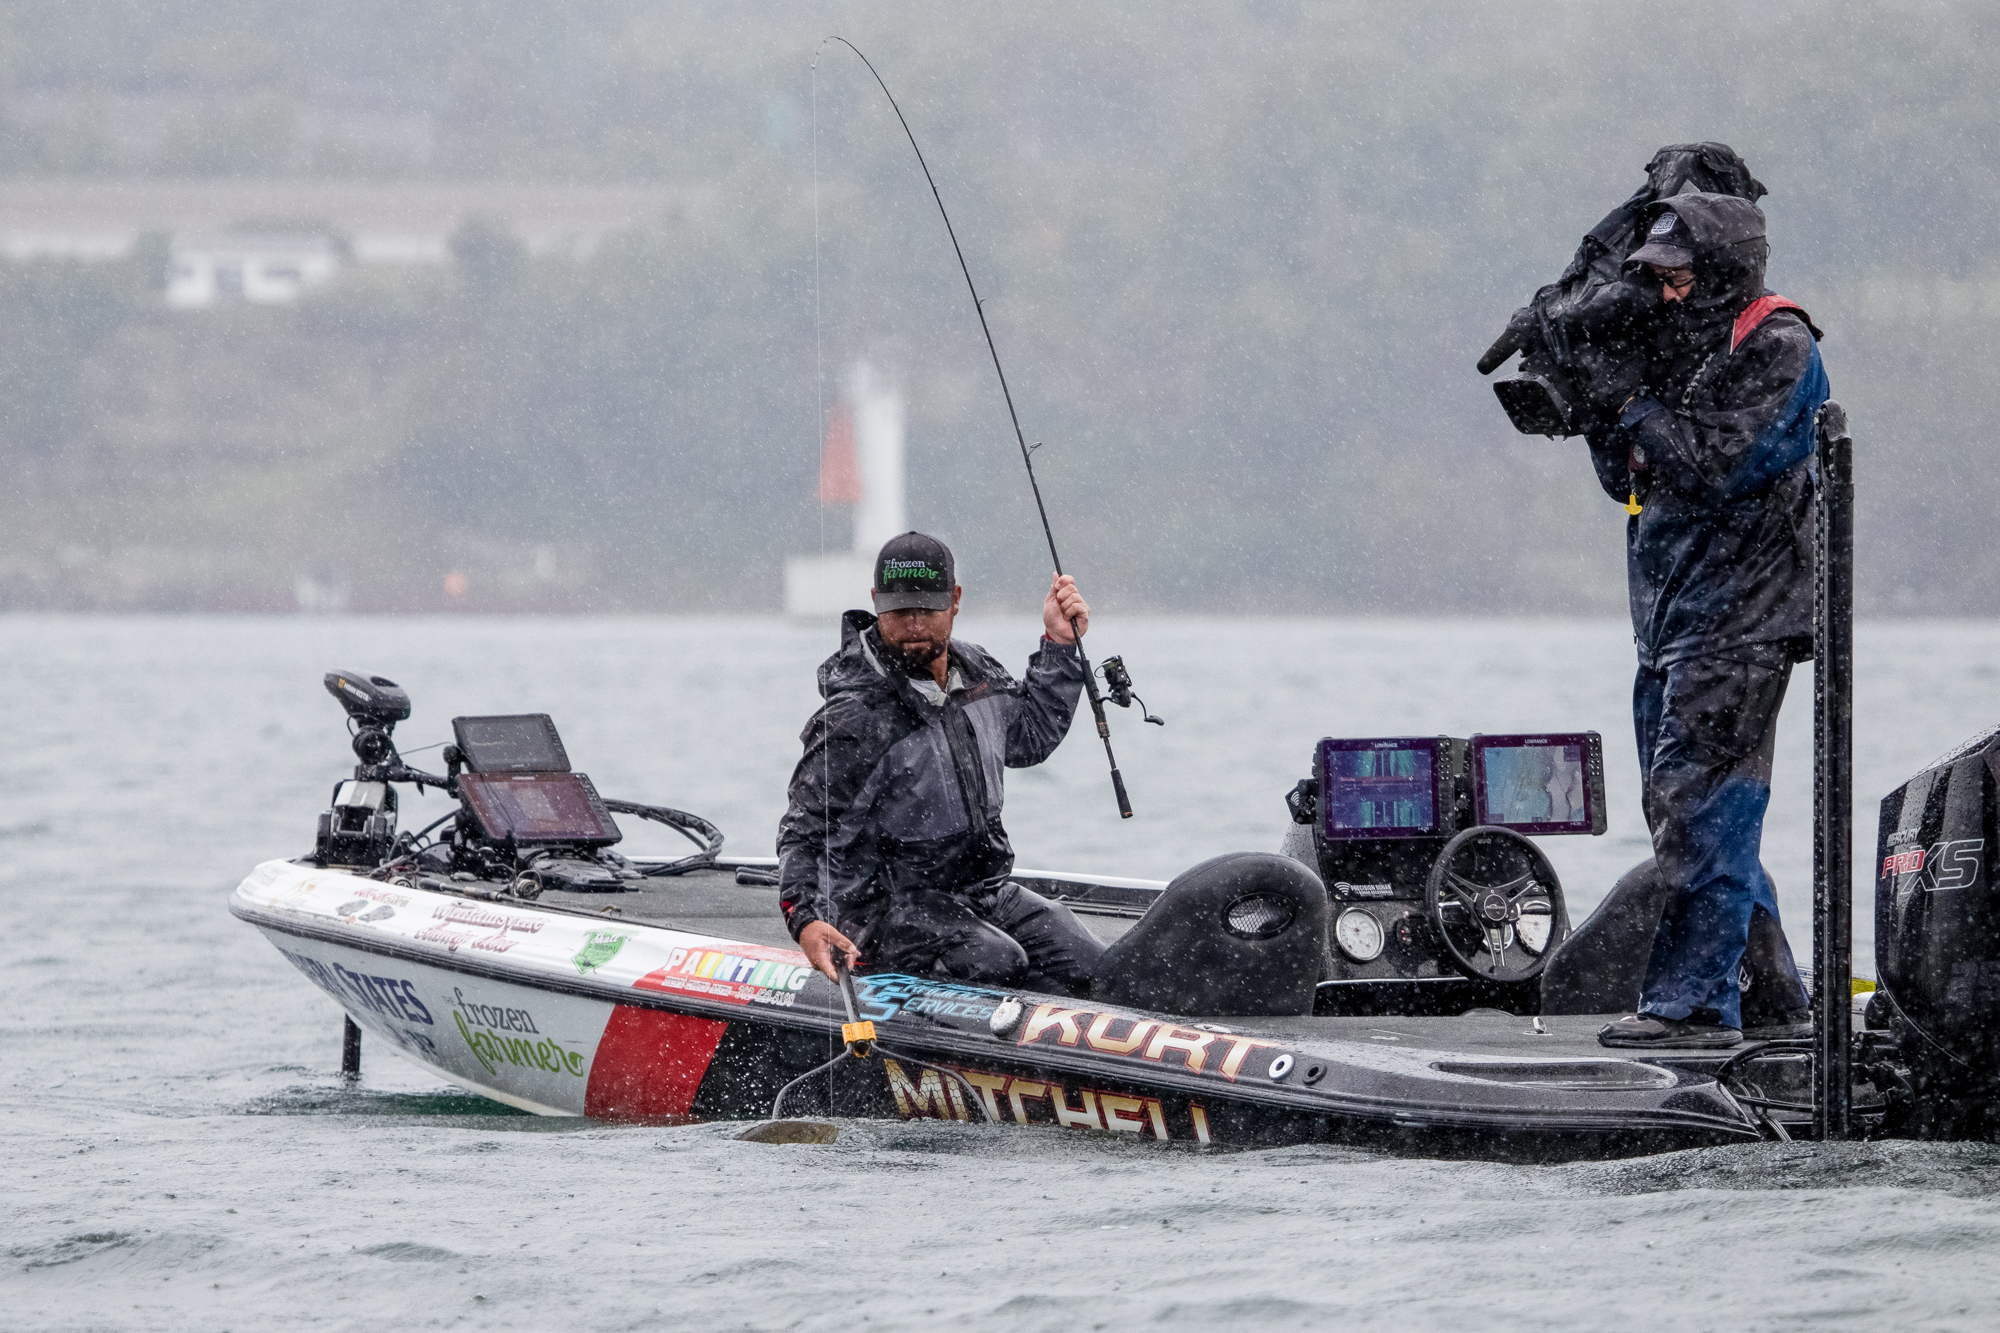 John Cox Leads Day Two at Tackle Warehouse TITLE presented by